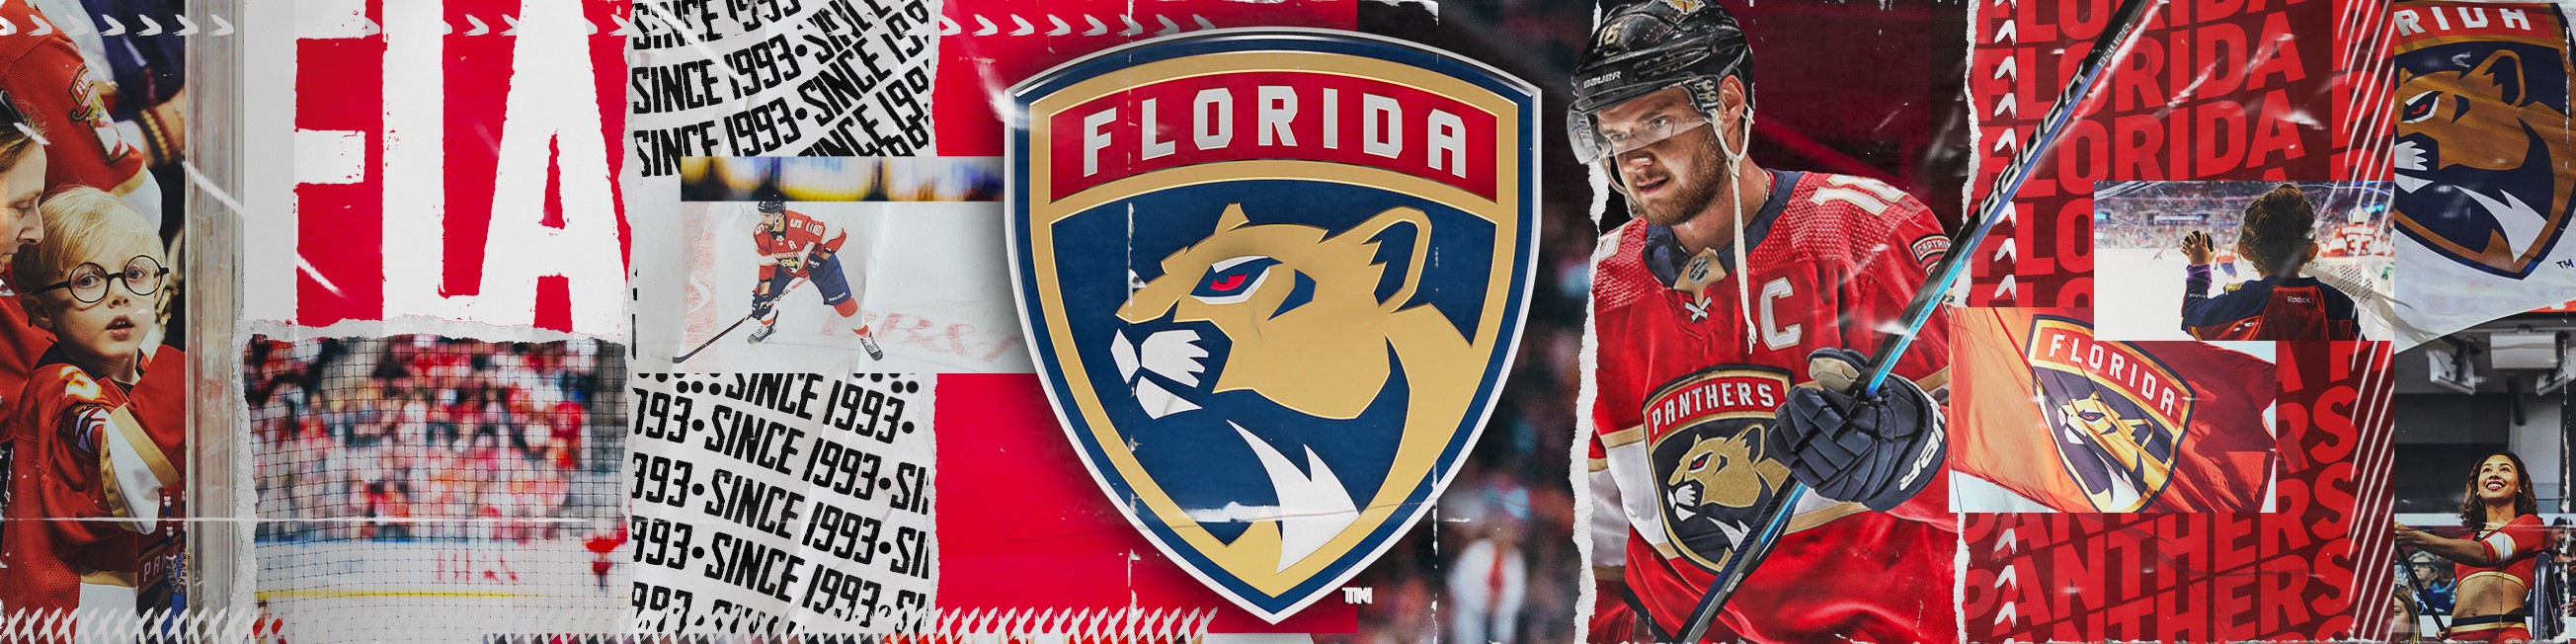 Florida Panthers / Panthers Seal Home Ice Edge With Win Over Lightning Toronto Sun